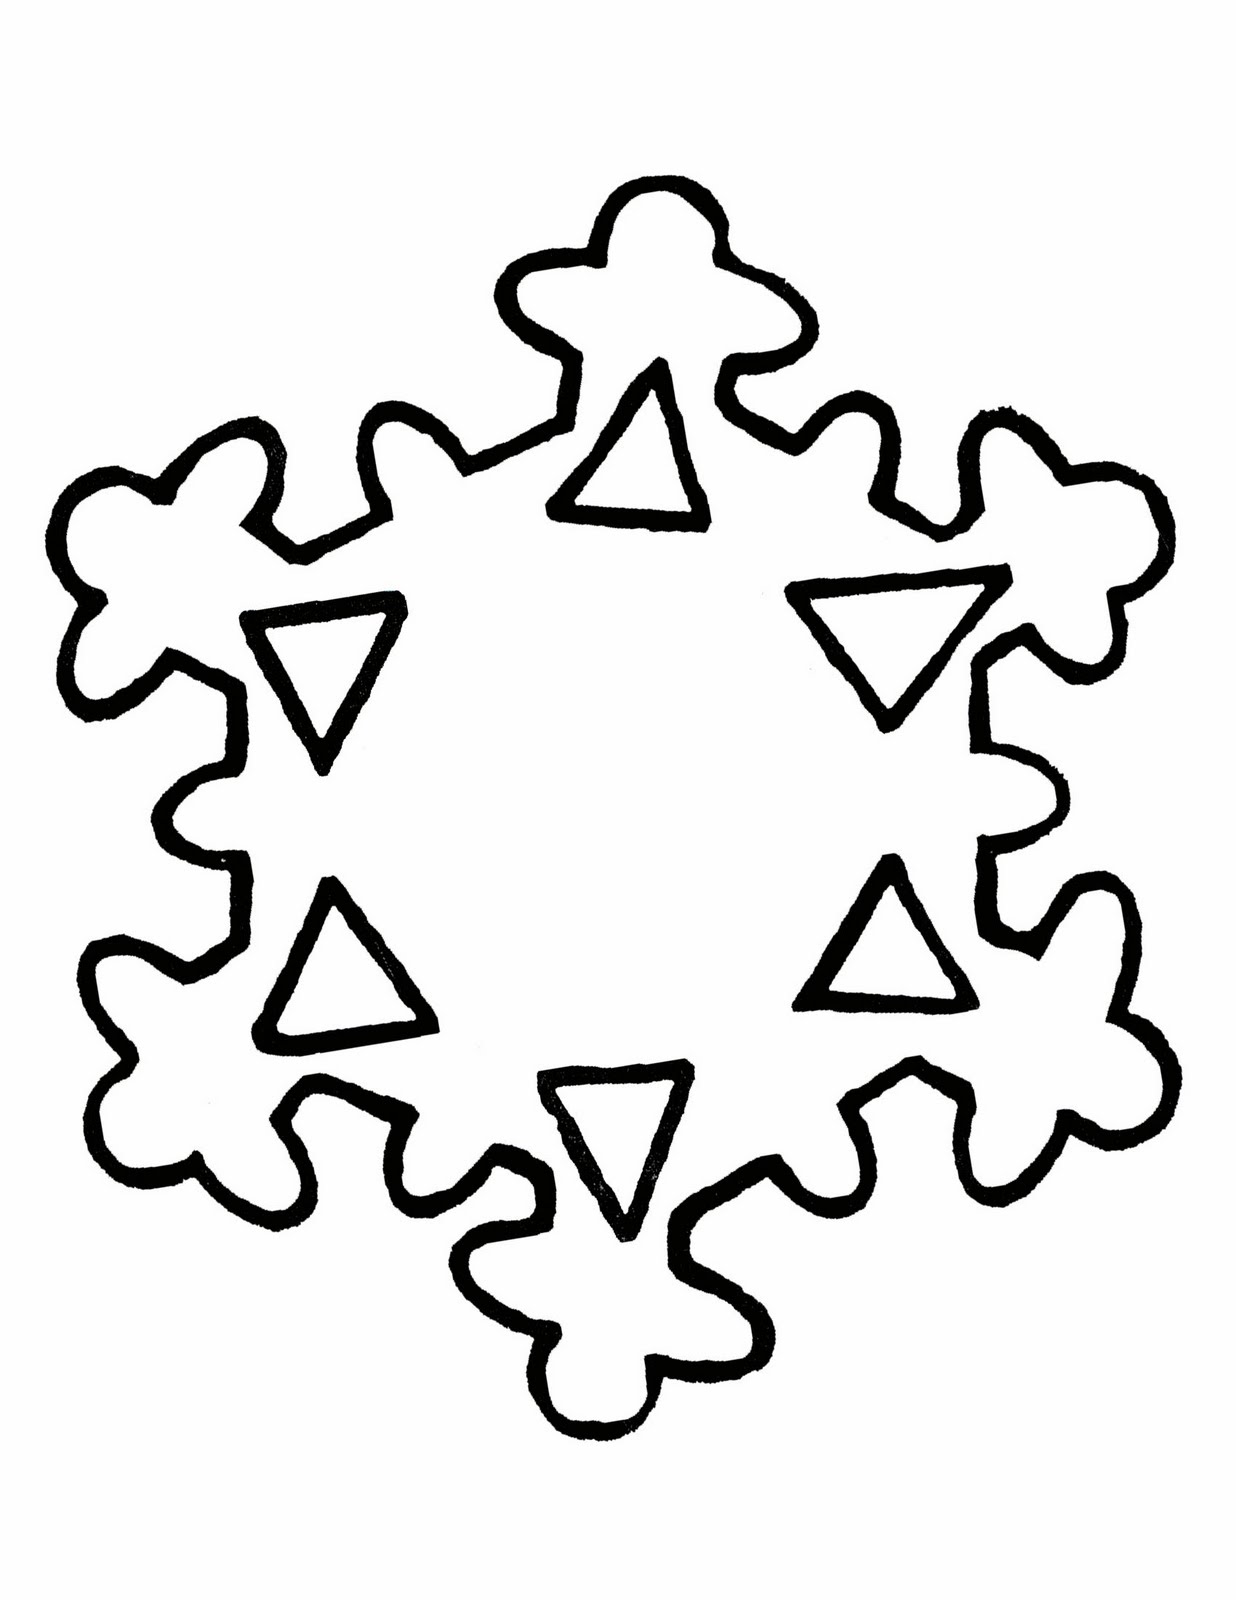 Snowflake Line Drawing - ClipArt Best